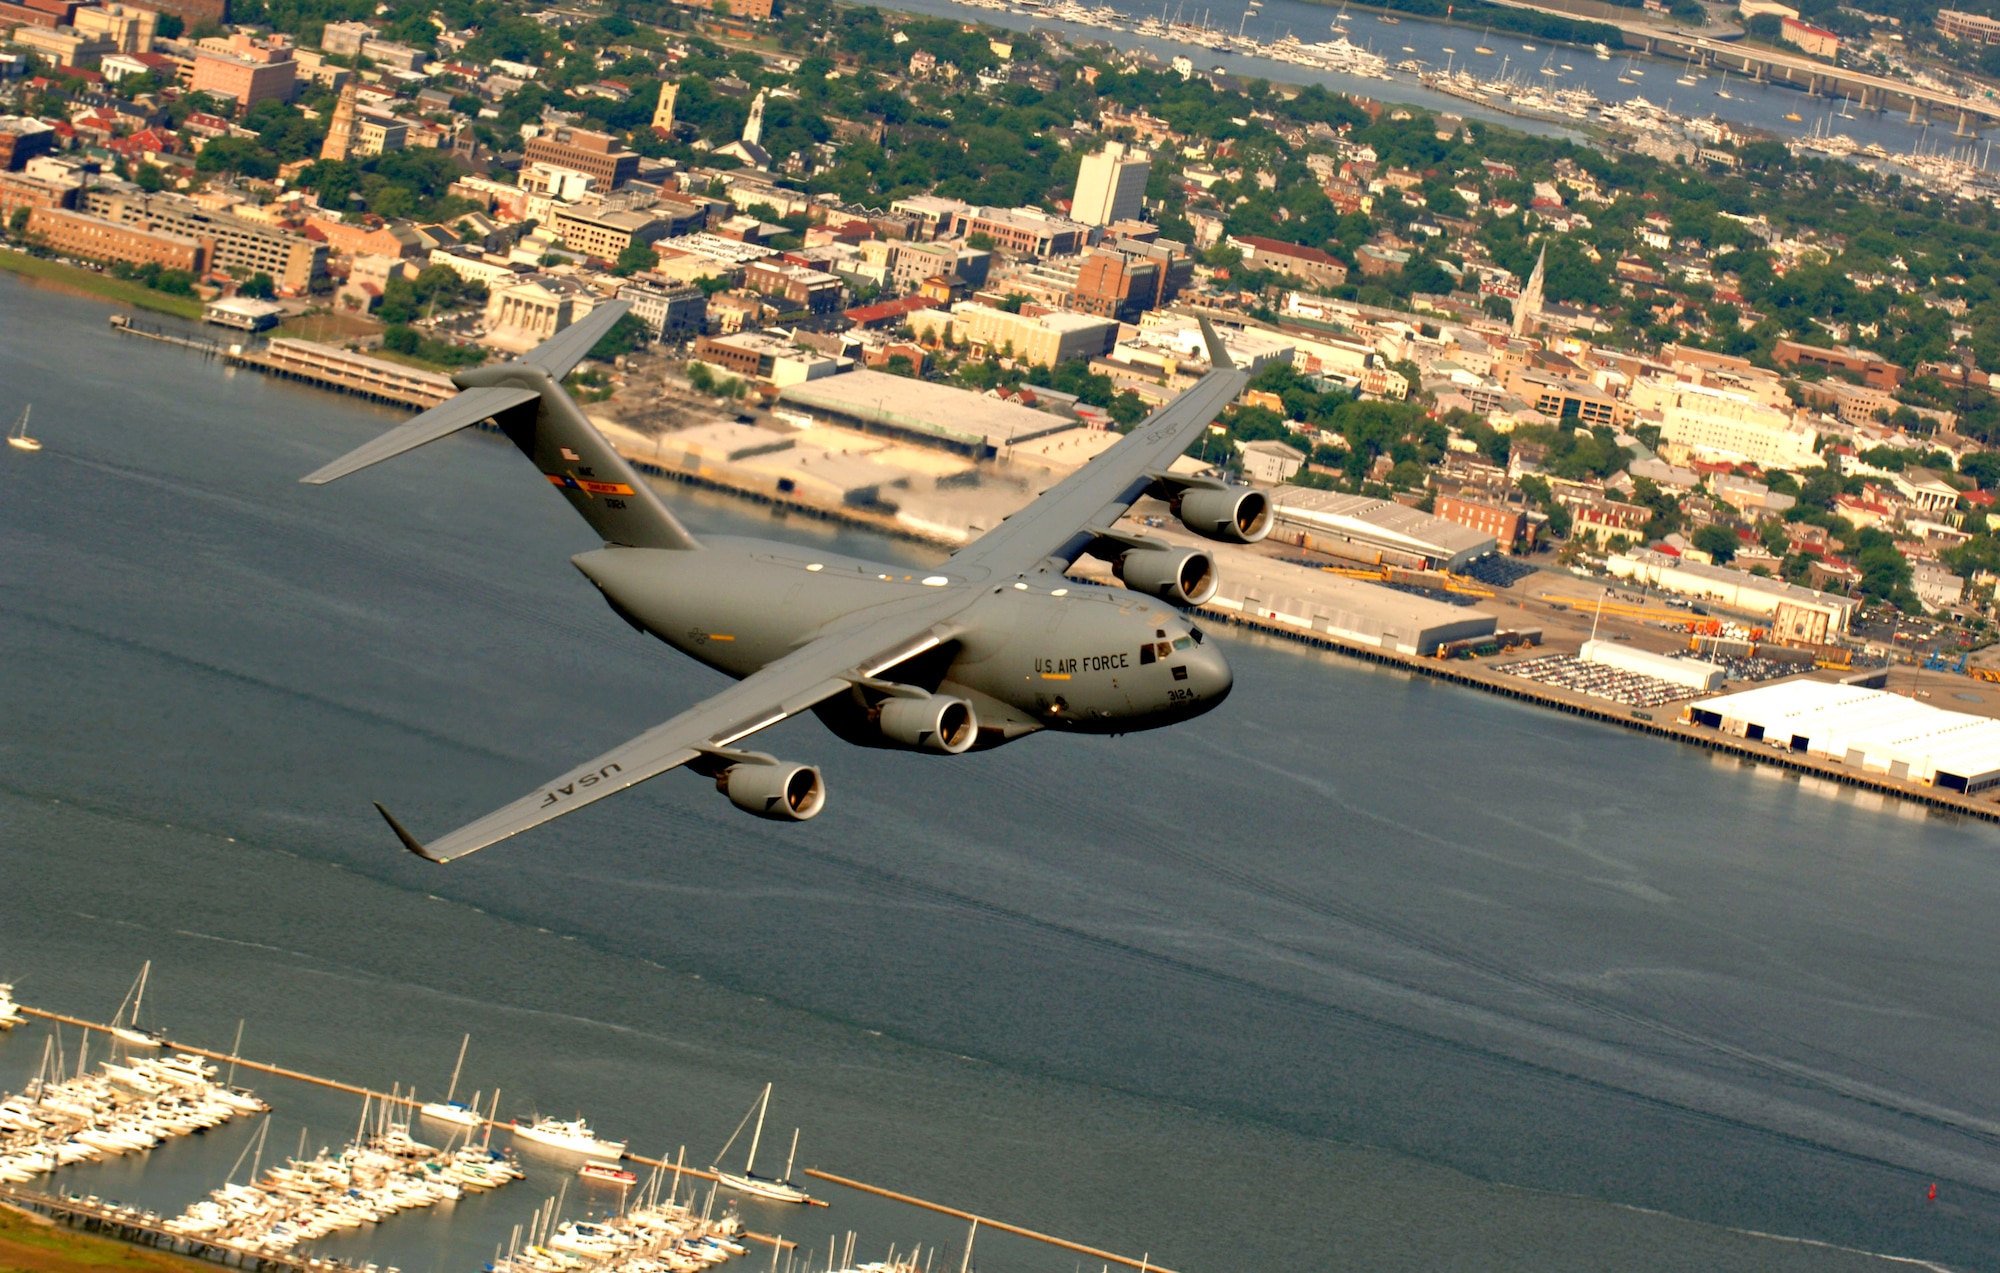 A C-17 Globemaster III from the 14th Airlift Squadron, Charleston Air Force Base, S.C., flies over downtown Charleston, S.C., during a training mission on Tuesday, May 16, 2006. (U.S. Air Force photo/Tech. Sg.t Russell E. Cooley IV)